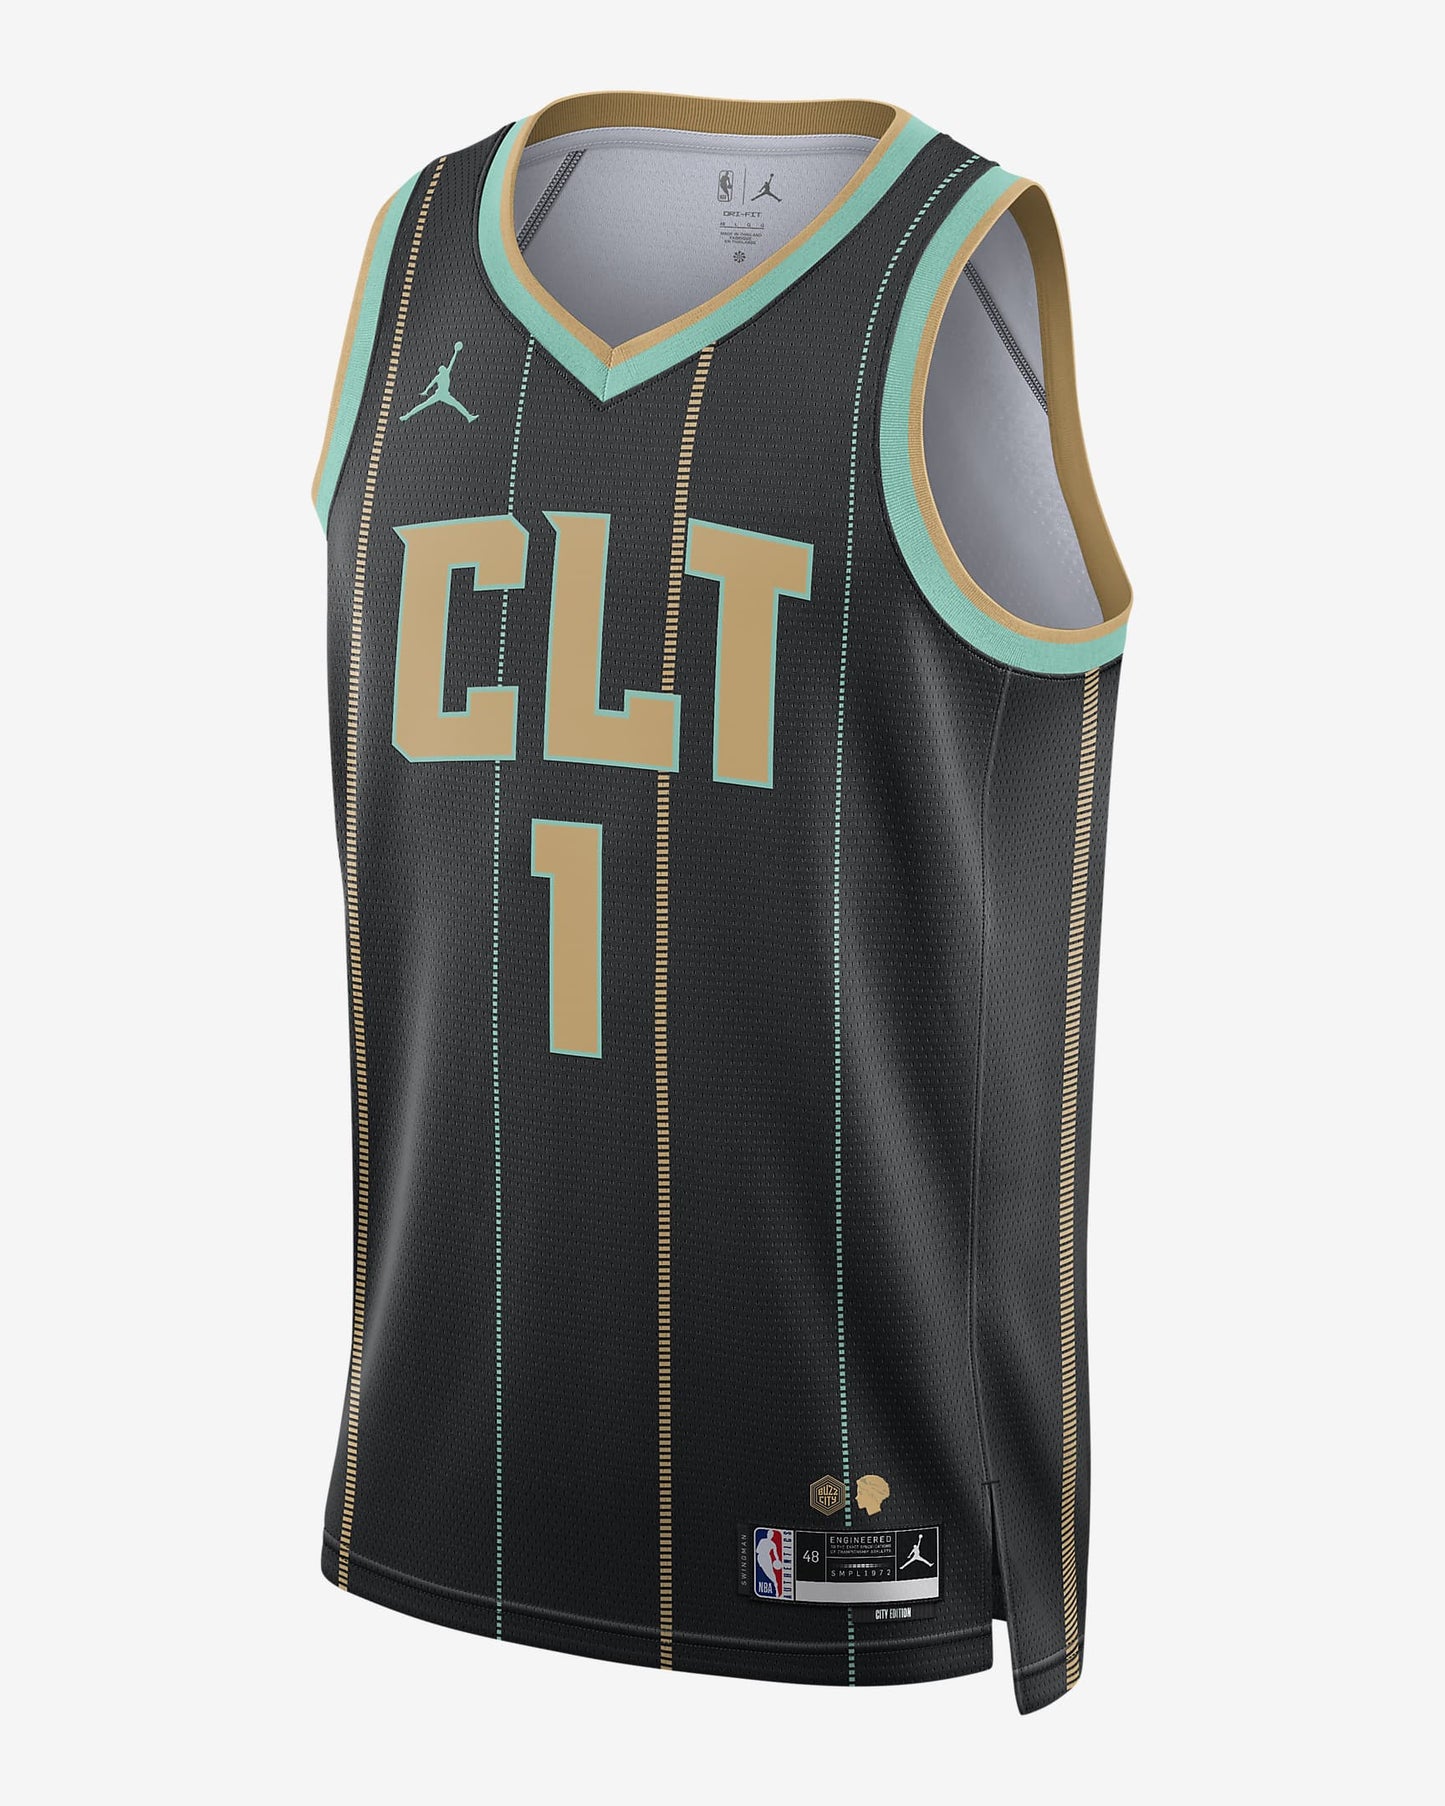 NBA City Edition 2019: Checkout the new Clippers City Edition